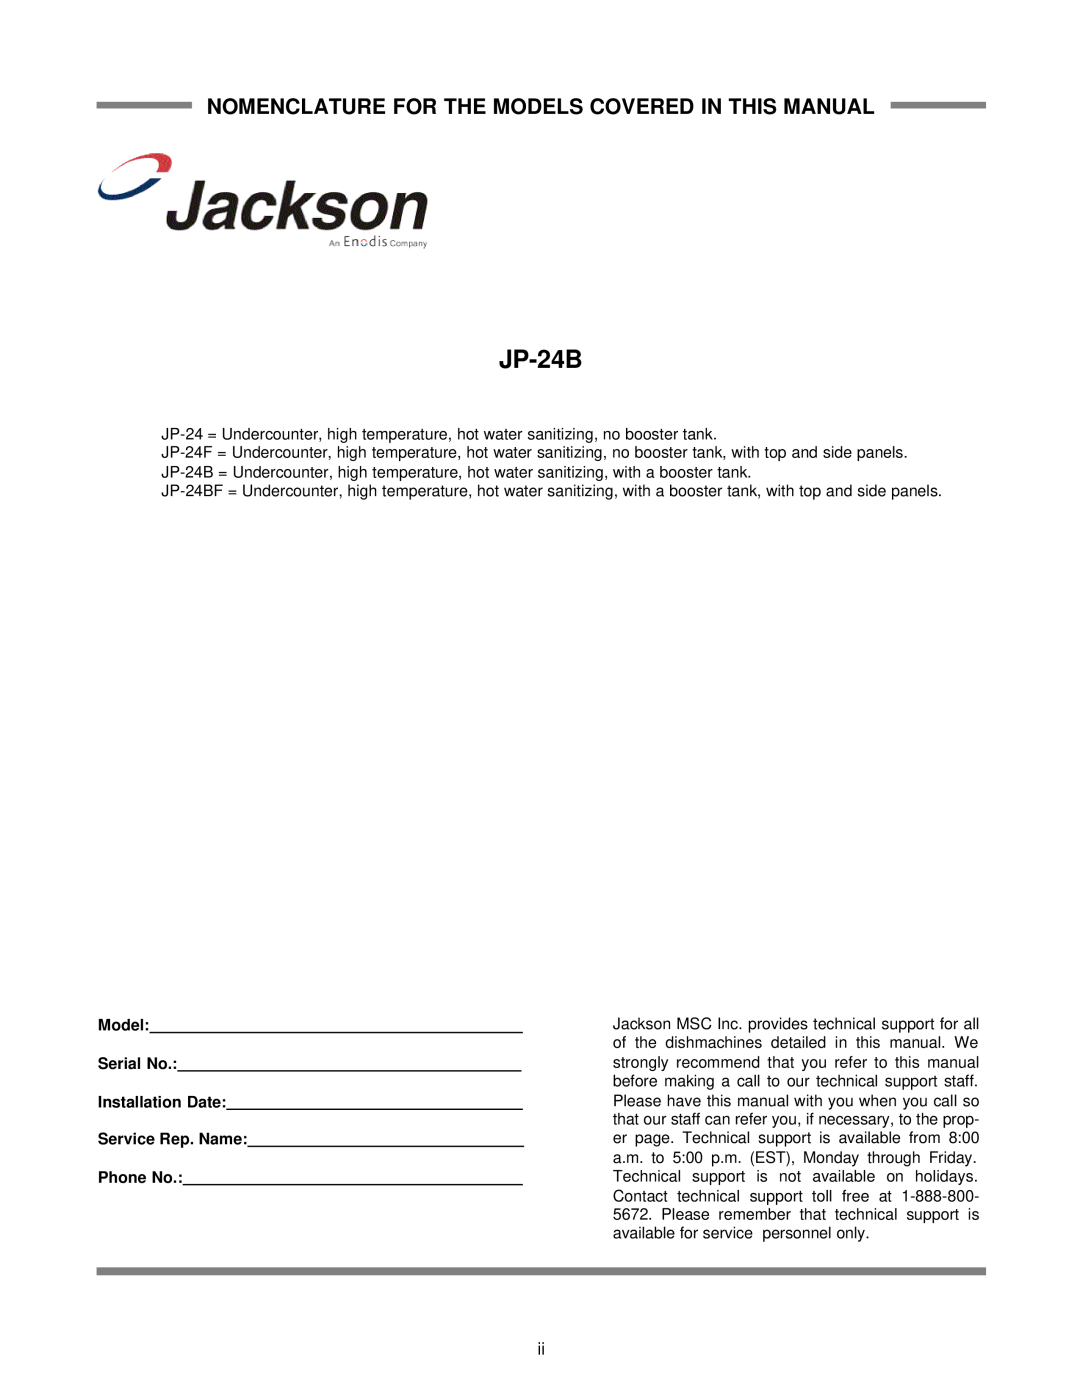 Jackson jp-24b, JP-24BF, JP-24F technical manual Nomenclature For The Models Covered In This Manual 